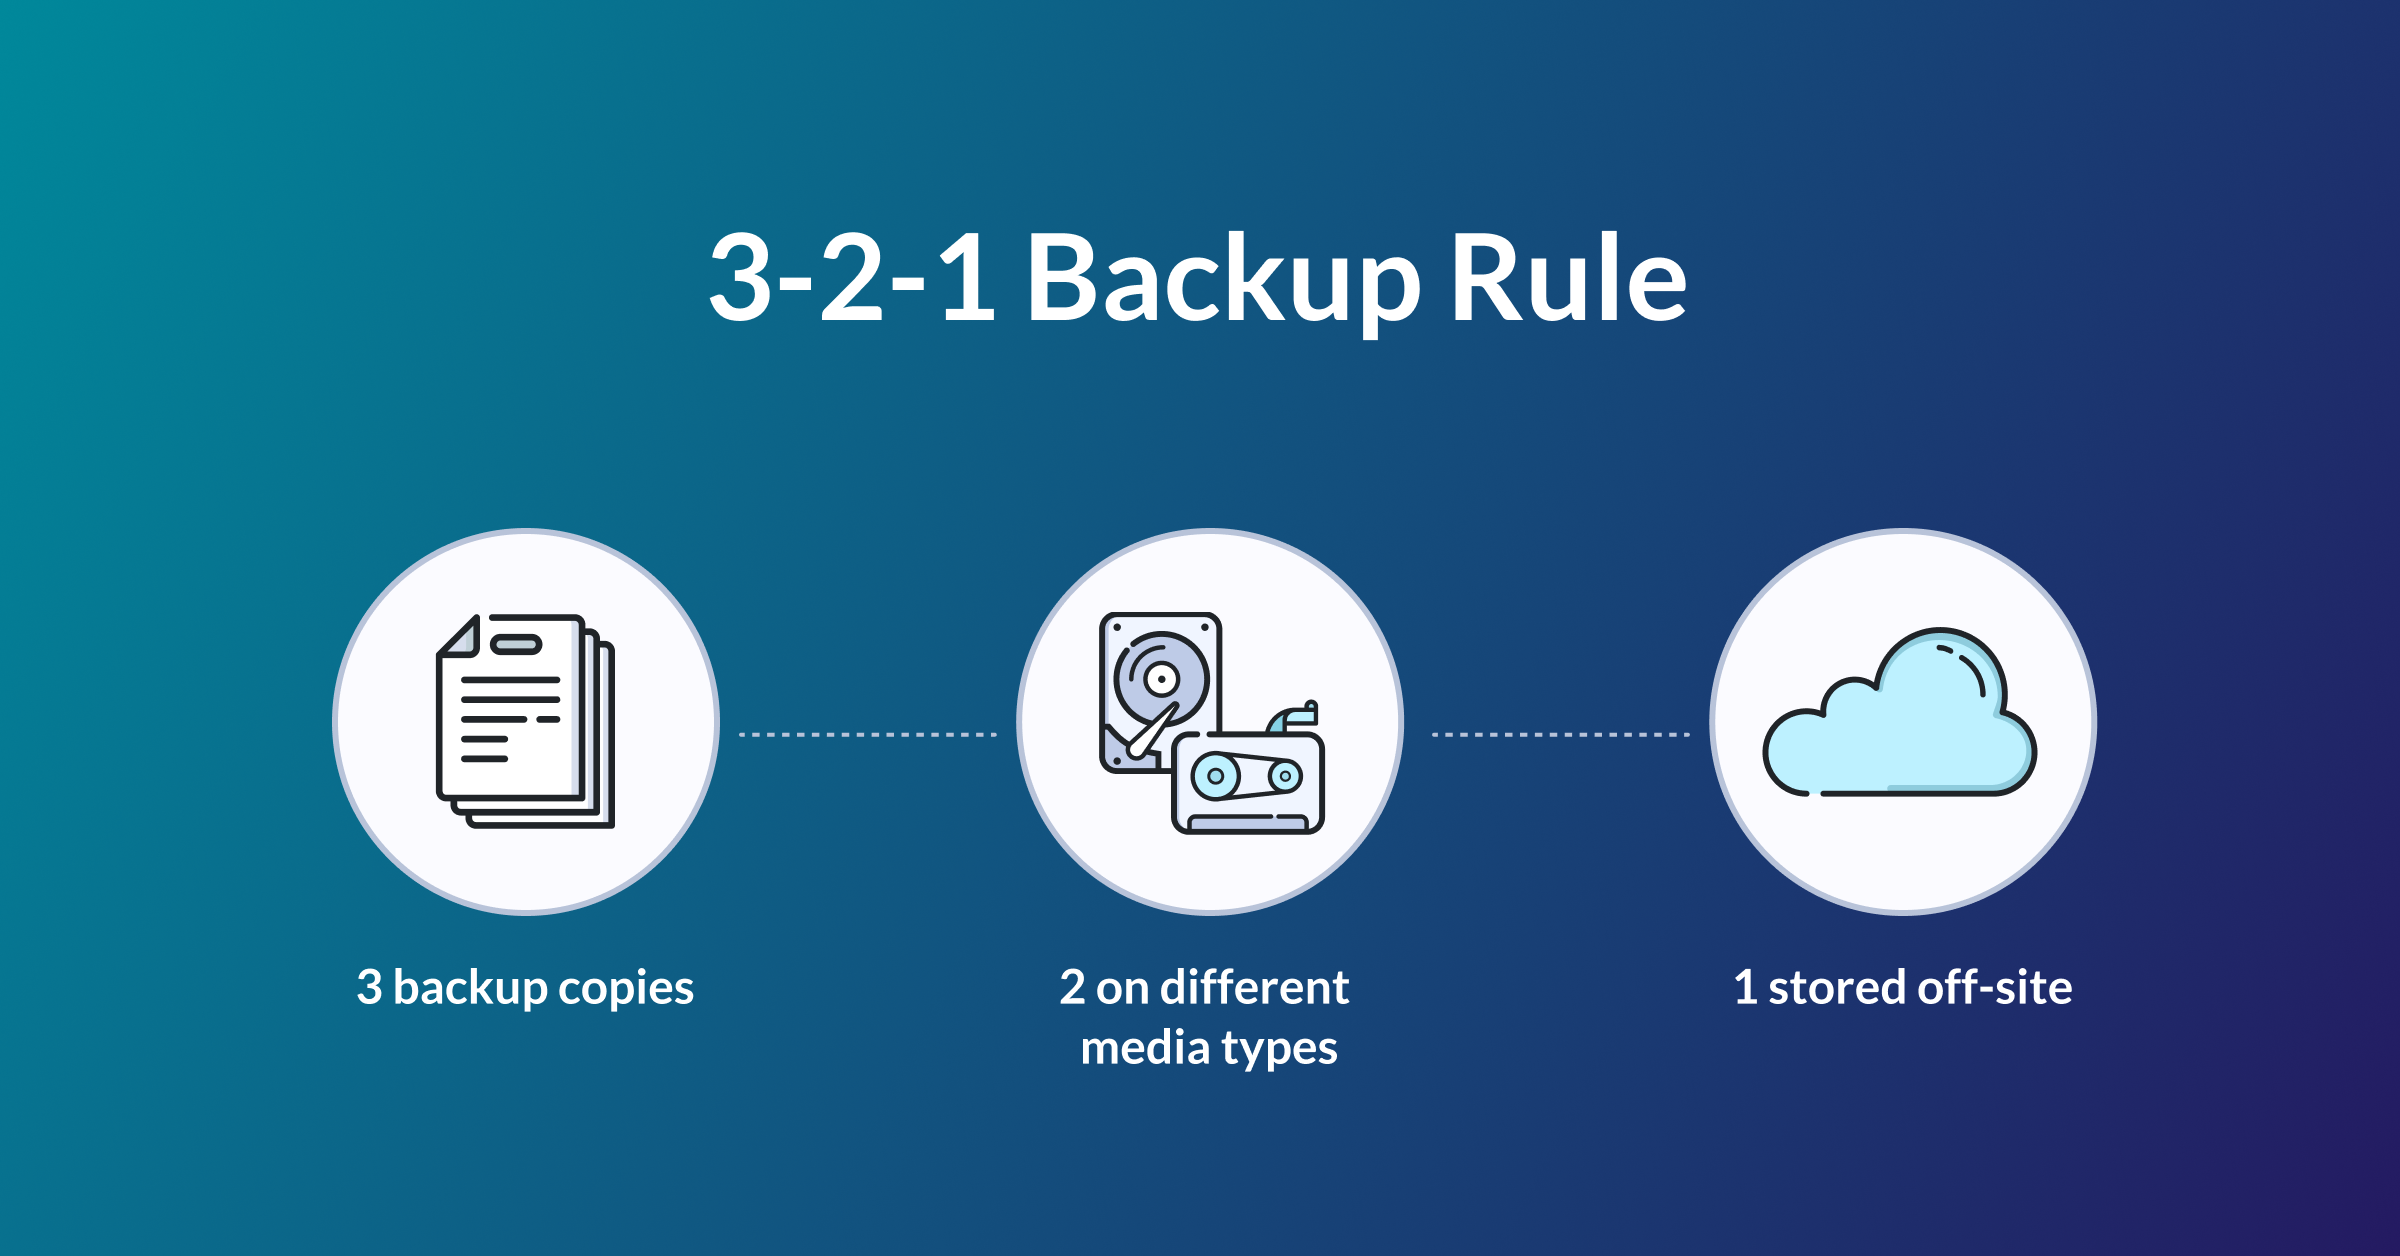 What is the 3-2-1 Backup Rule